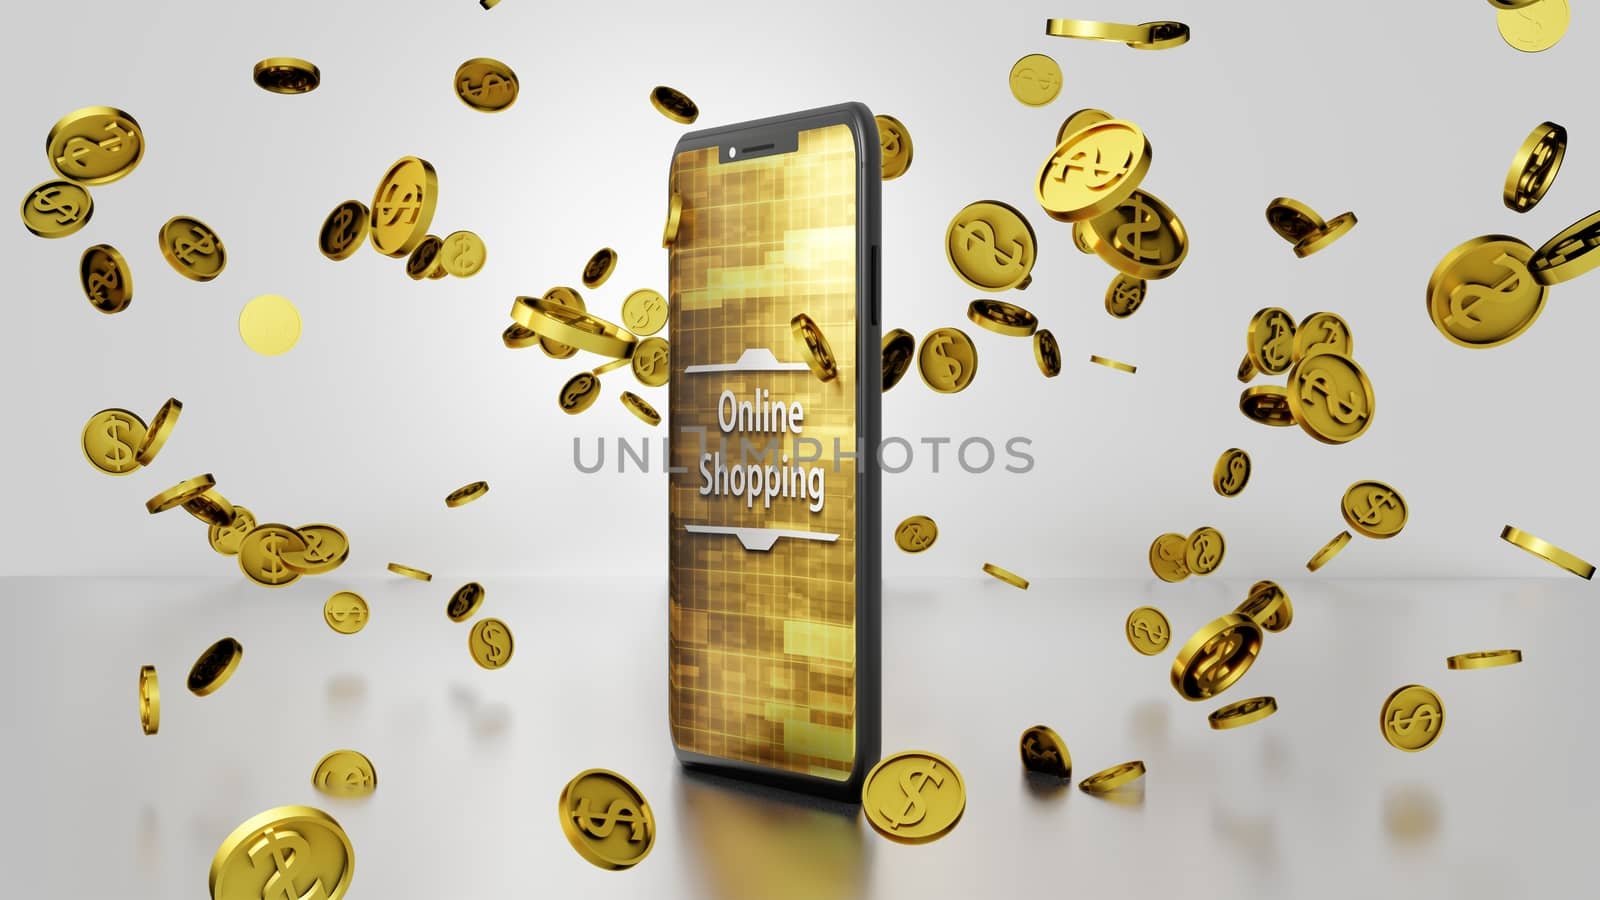 8K Online Shopping 3D render Smartphone and Golden Dollar Coins Falling and Bouncing on the Floor with Abstract Digital Display on the Screen Ver.2